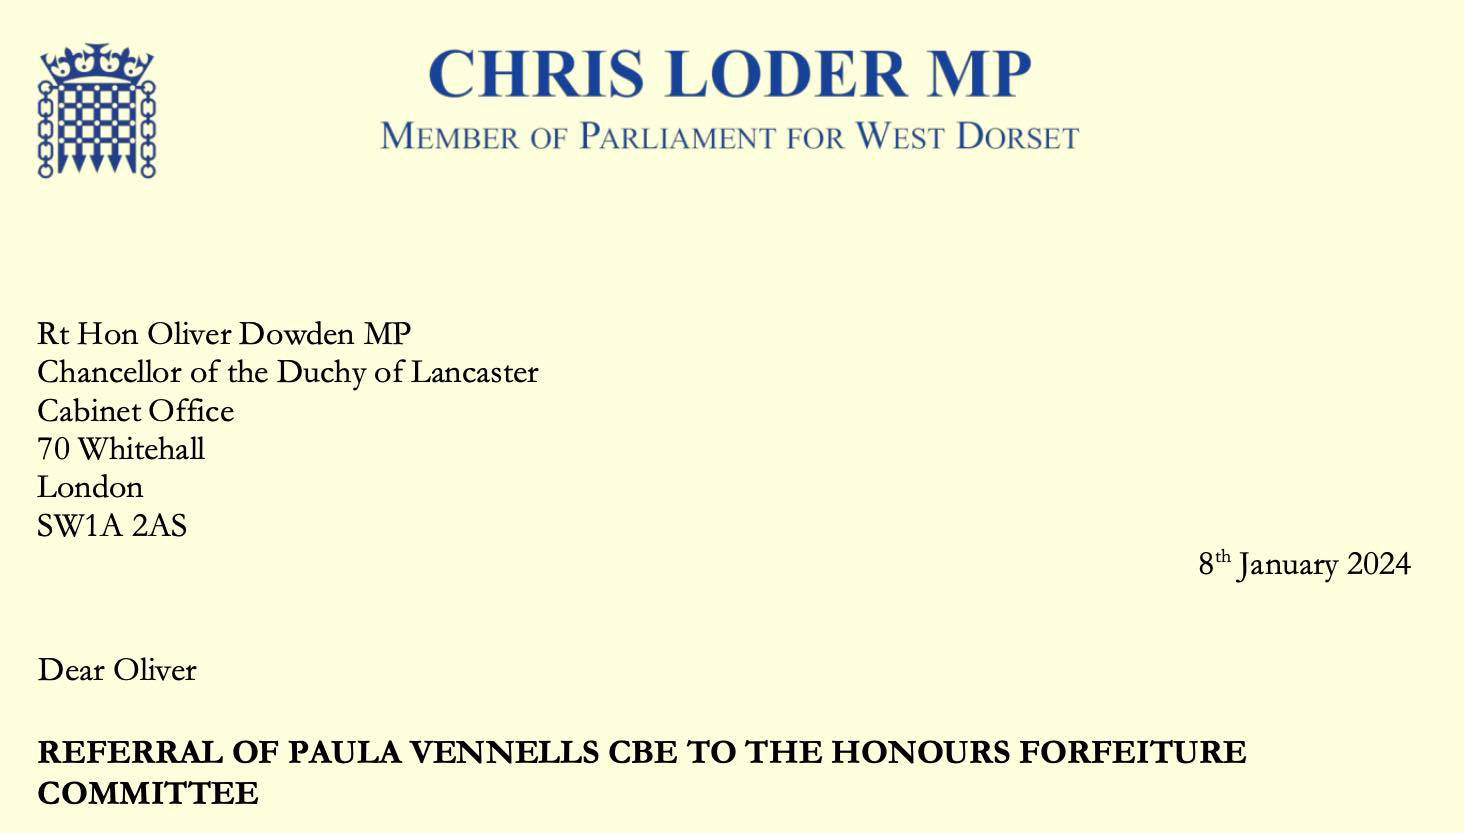 Click the image to read Chris Loder MP's letter in full (opens in new window)